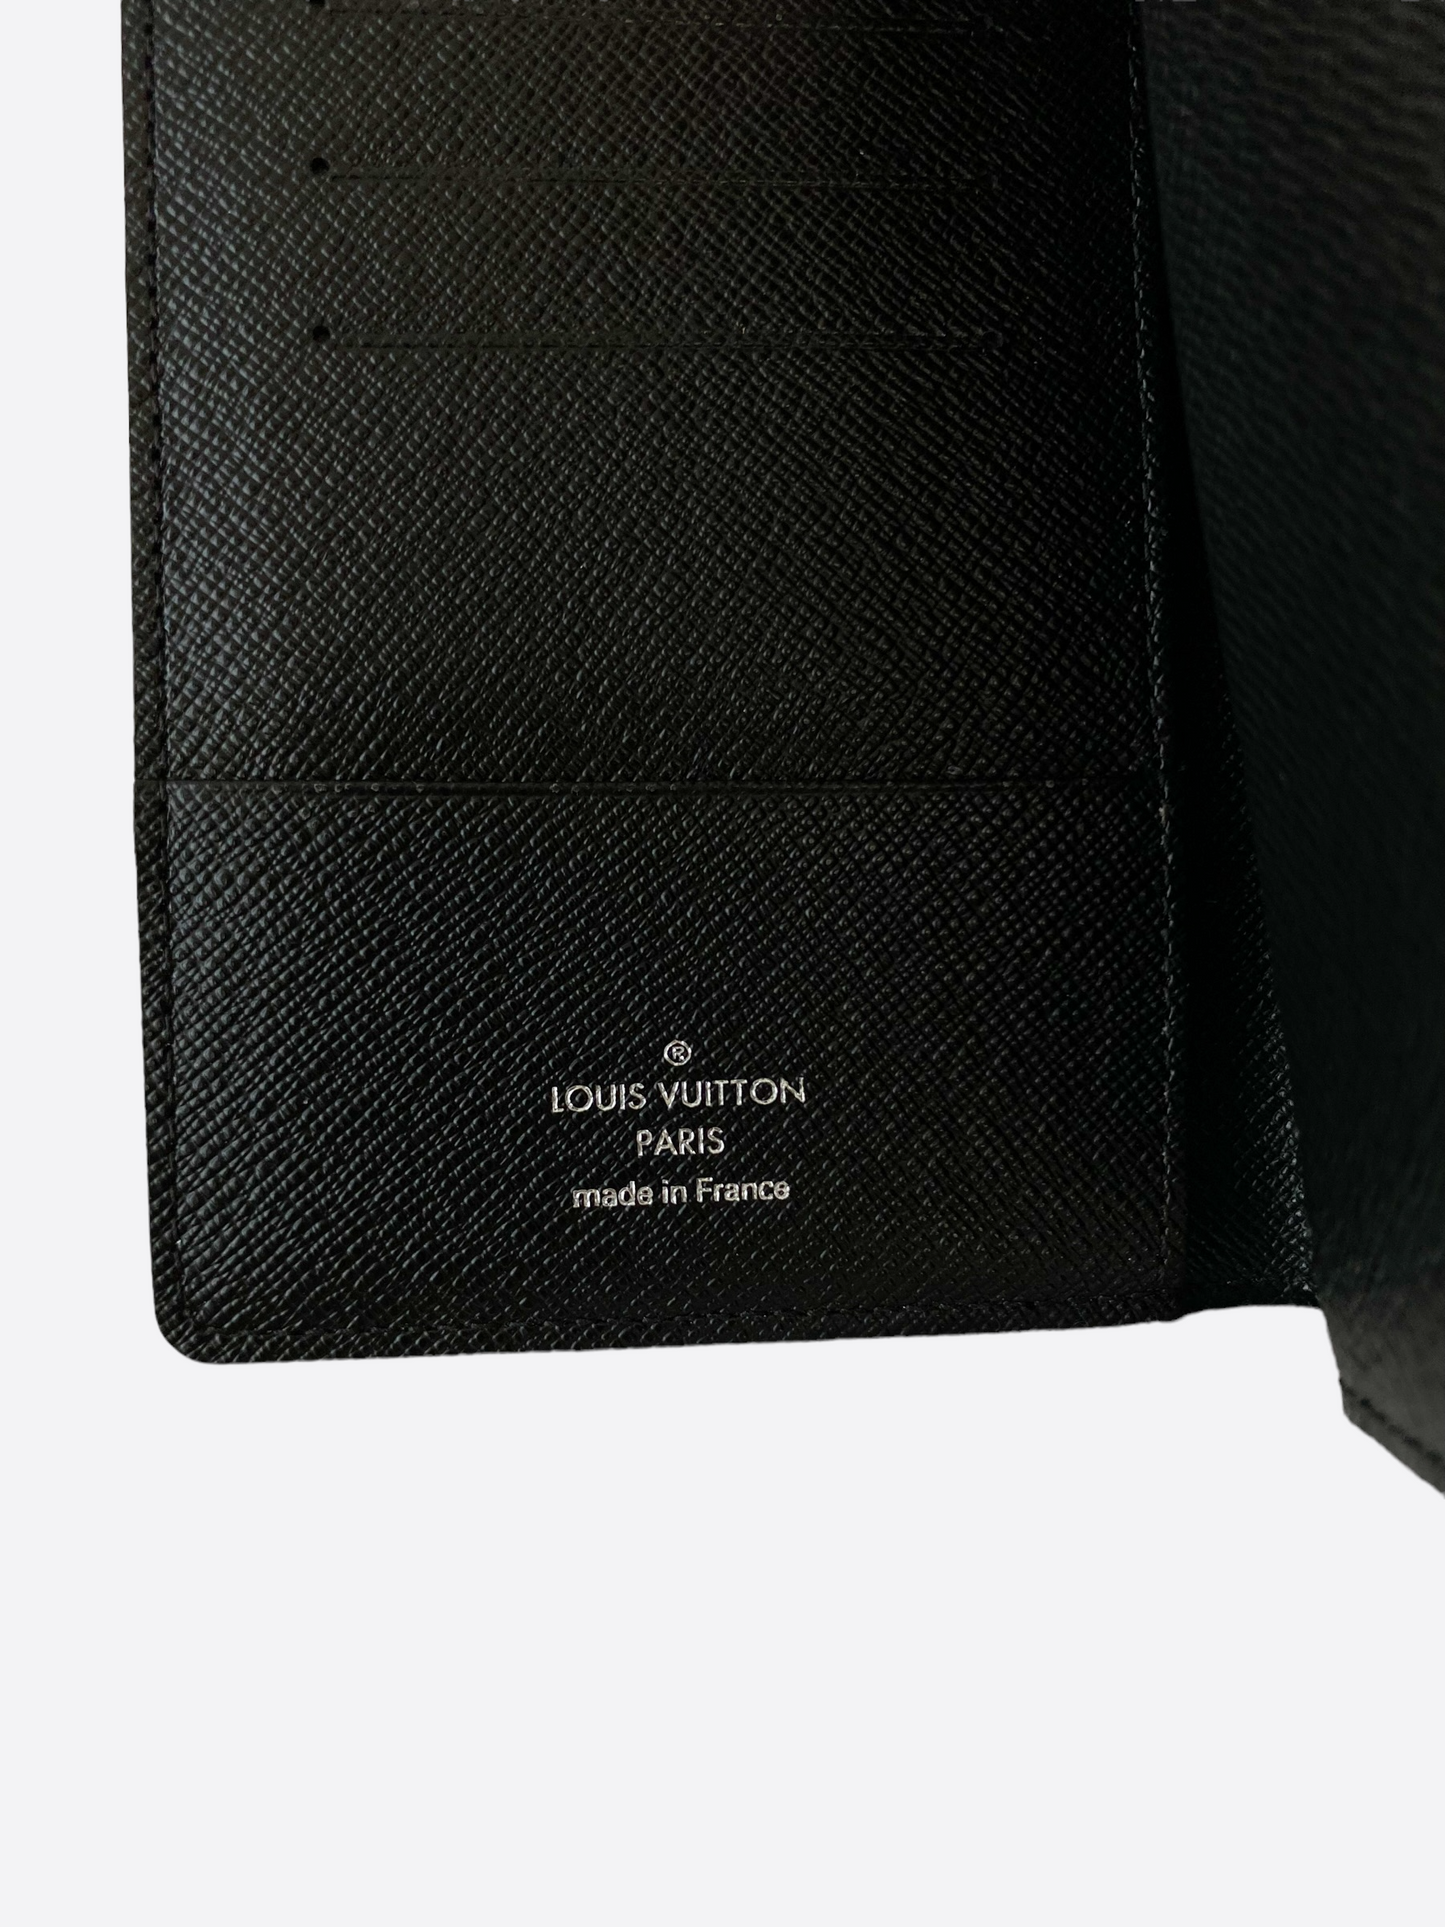 Shop Louis Vuitton Passport cover (M64596, N64411) by トモポエム